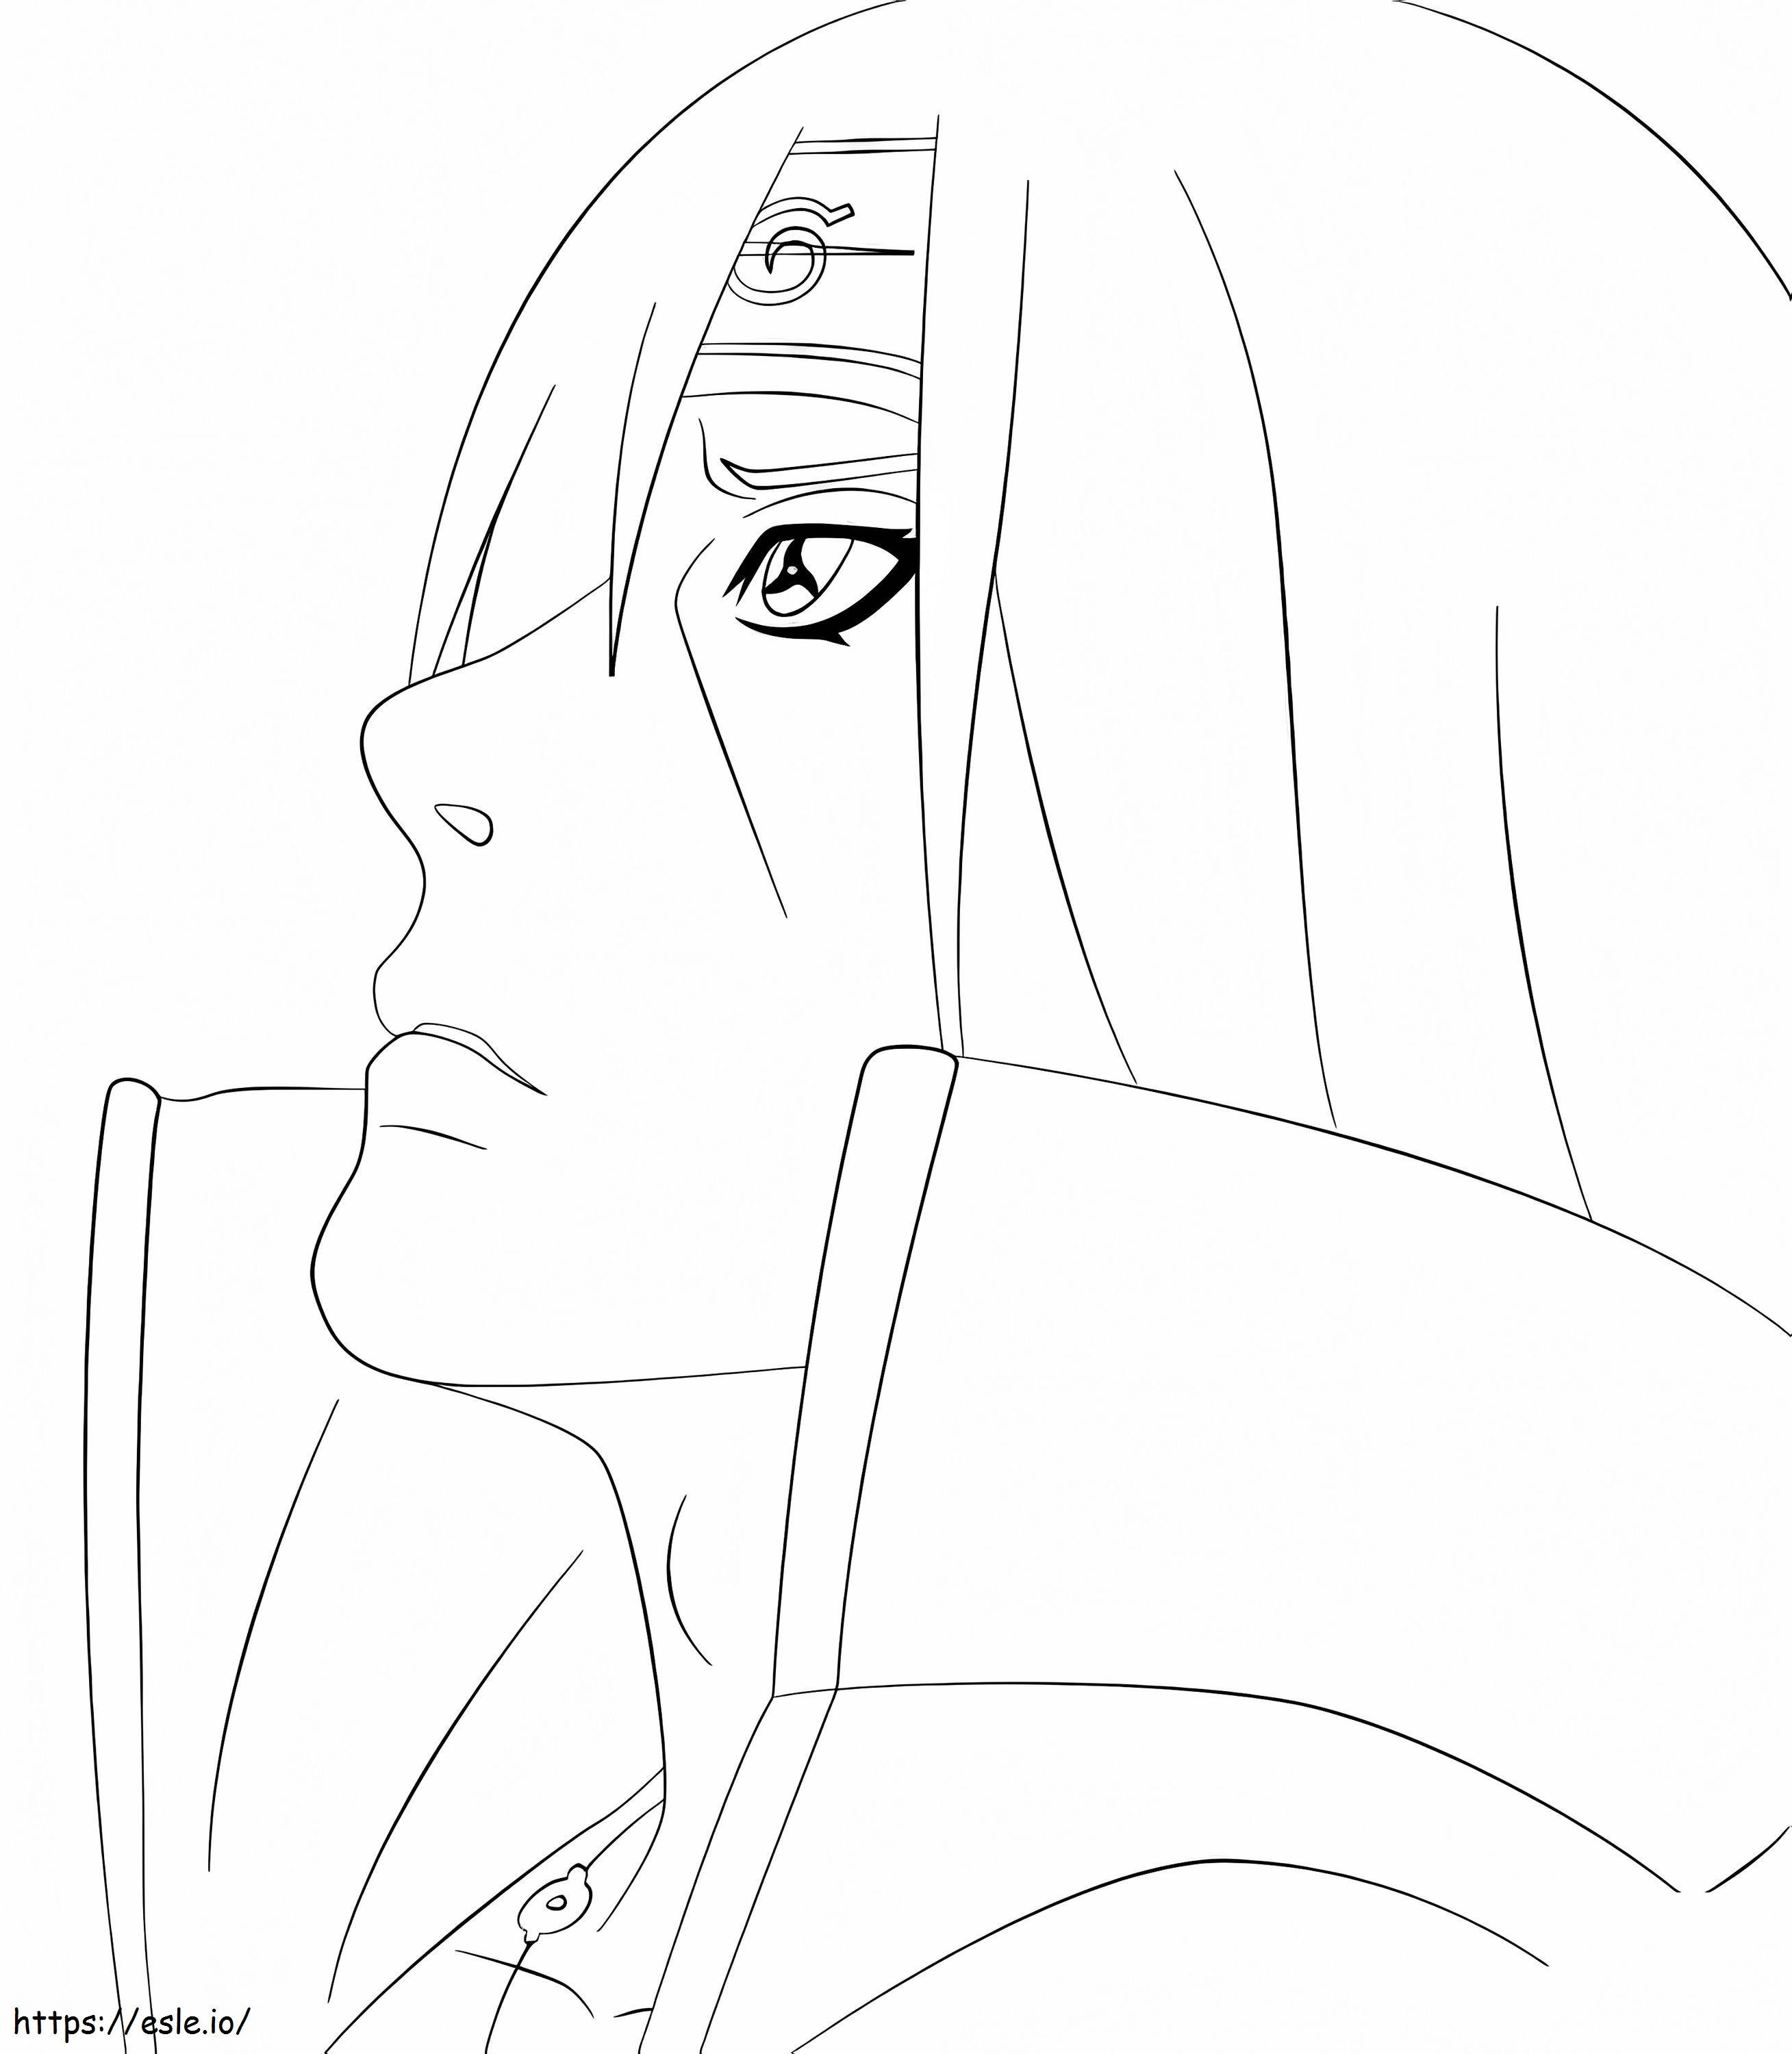 Left Face Itachi coloring page